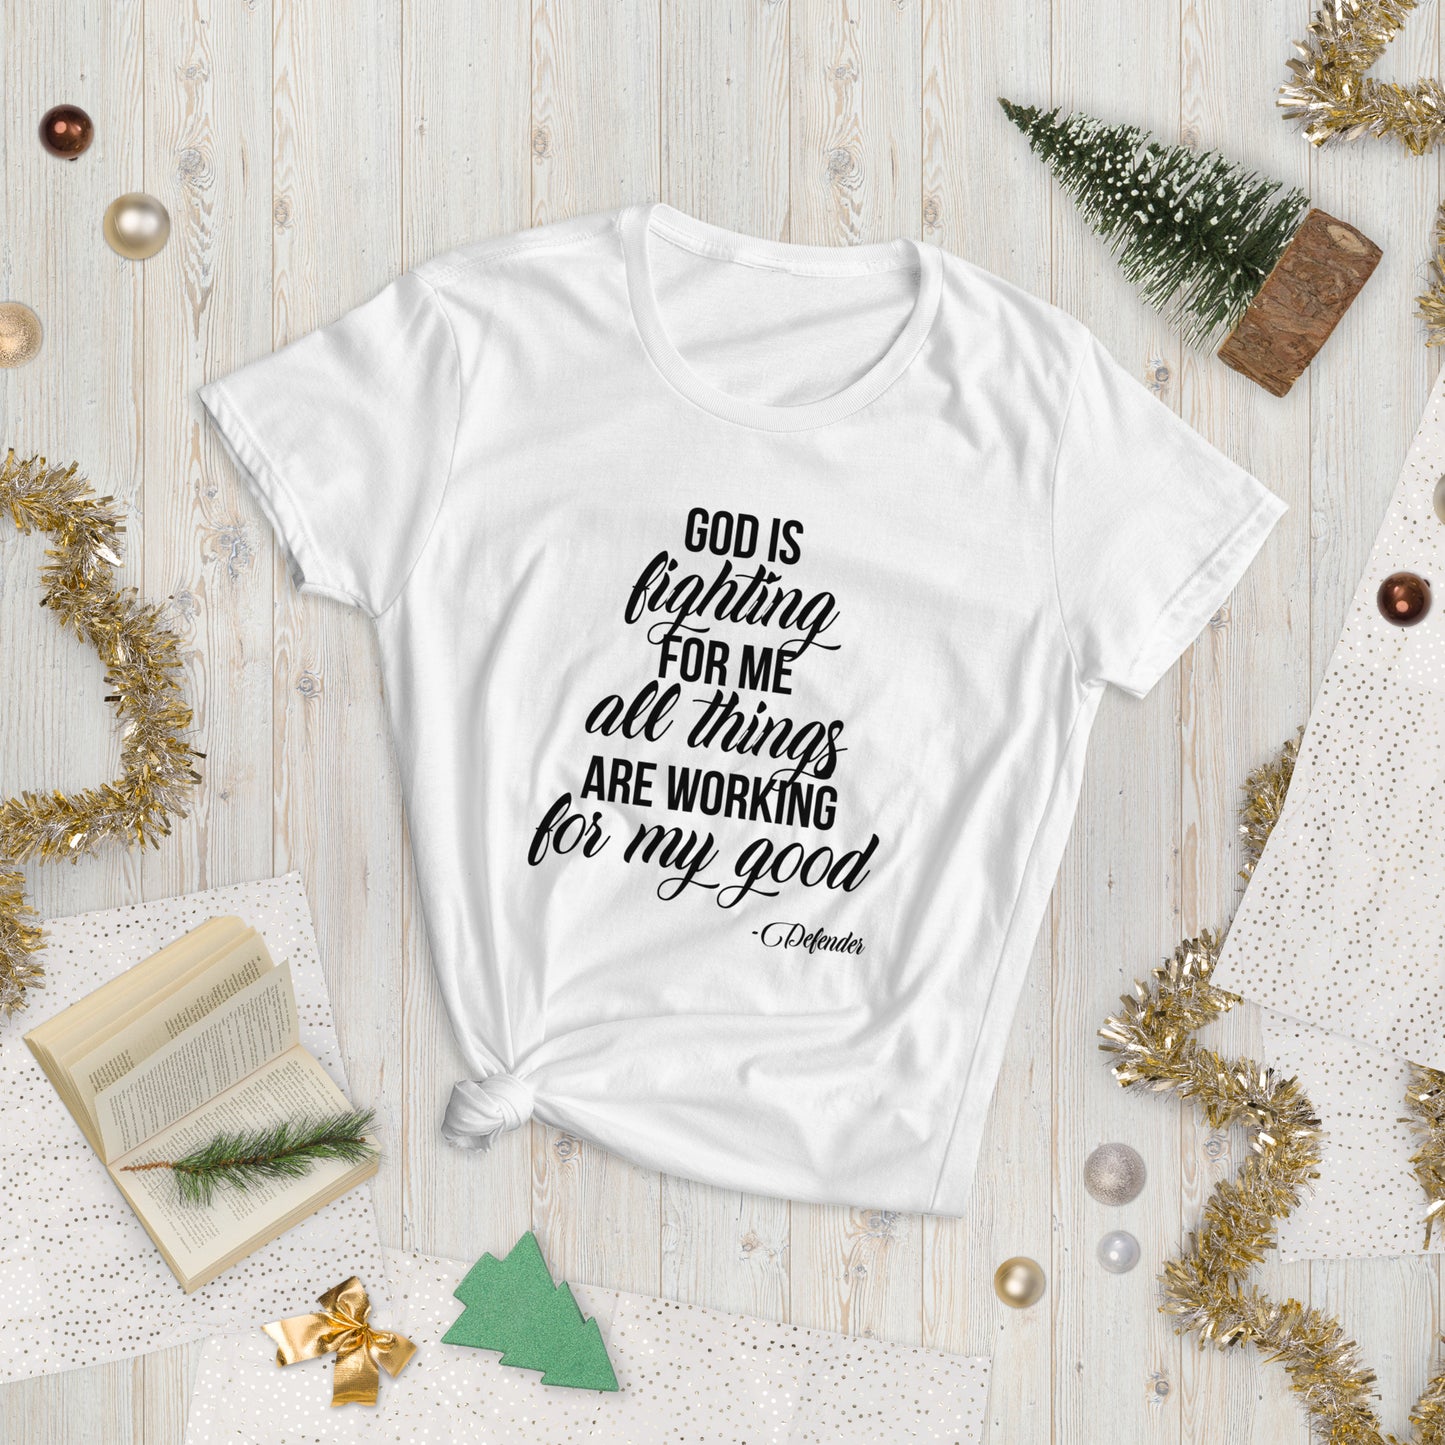 God is Fighting For Me and All Things are Working for My Good Women's short sleeve t-shirt